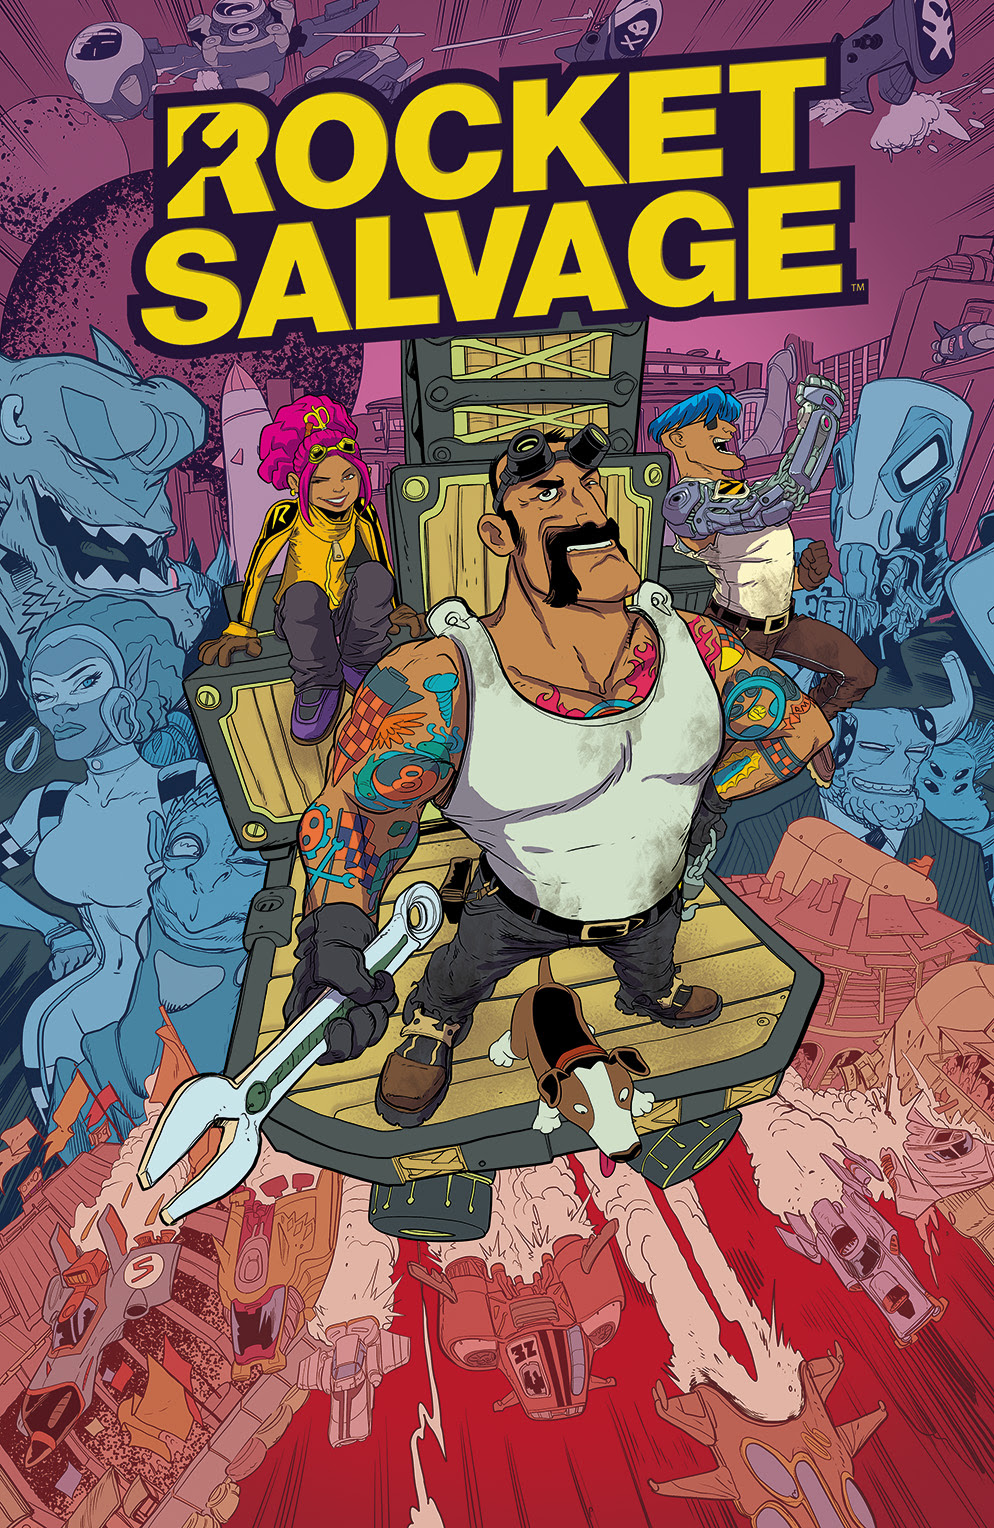 ROCKET SALVAGE #1 Cover A by Bachan